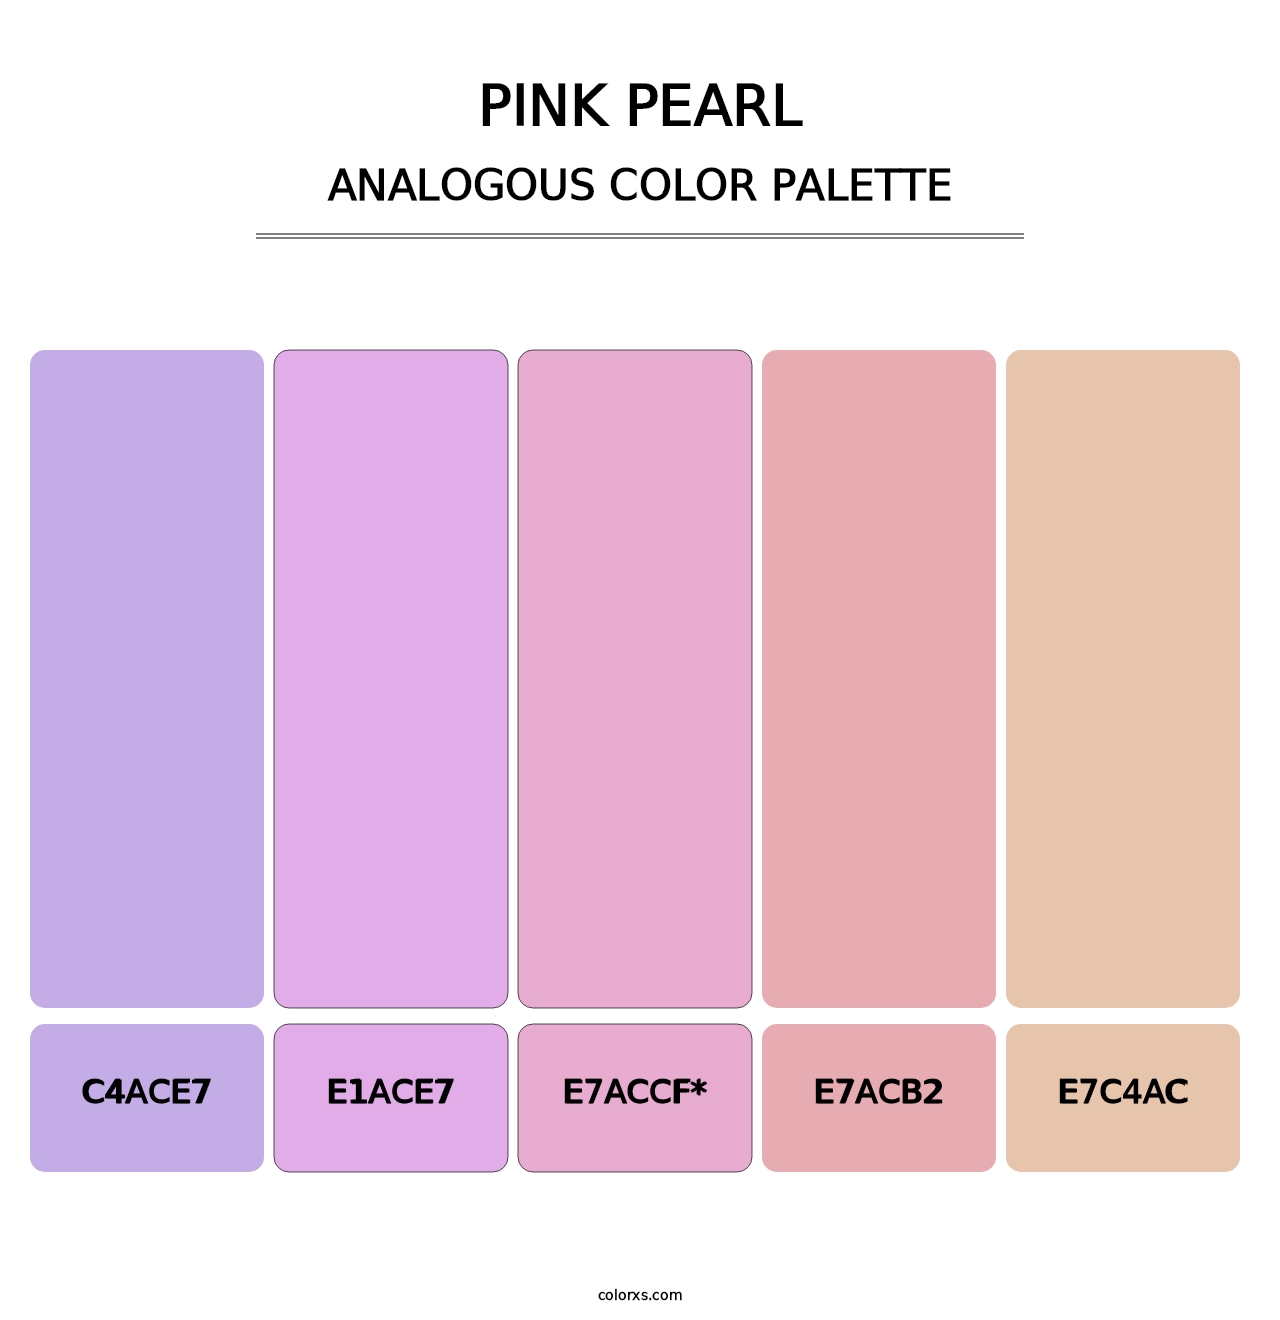 Pink Pearl - Analogous Color Palette